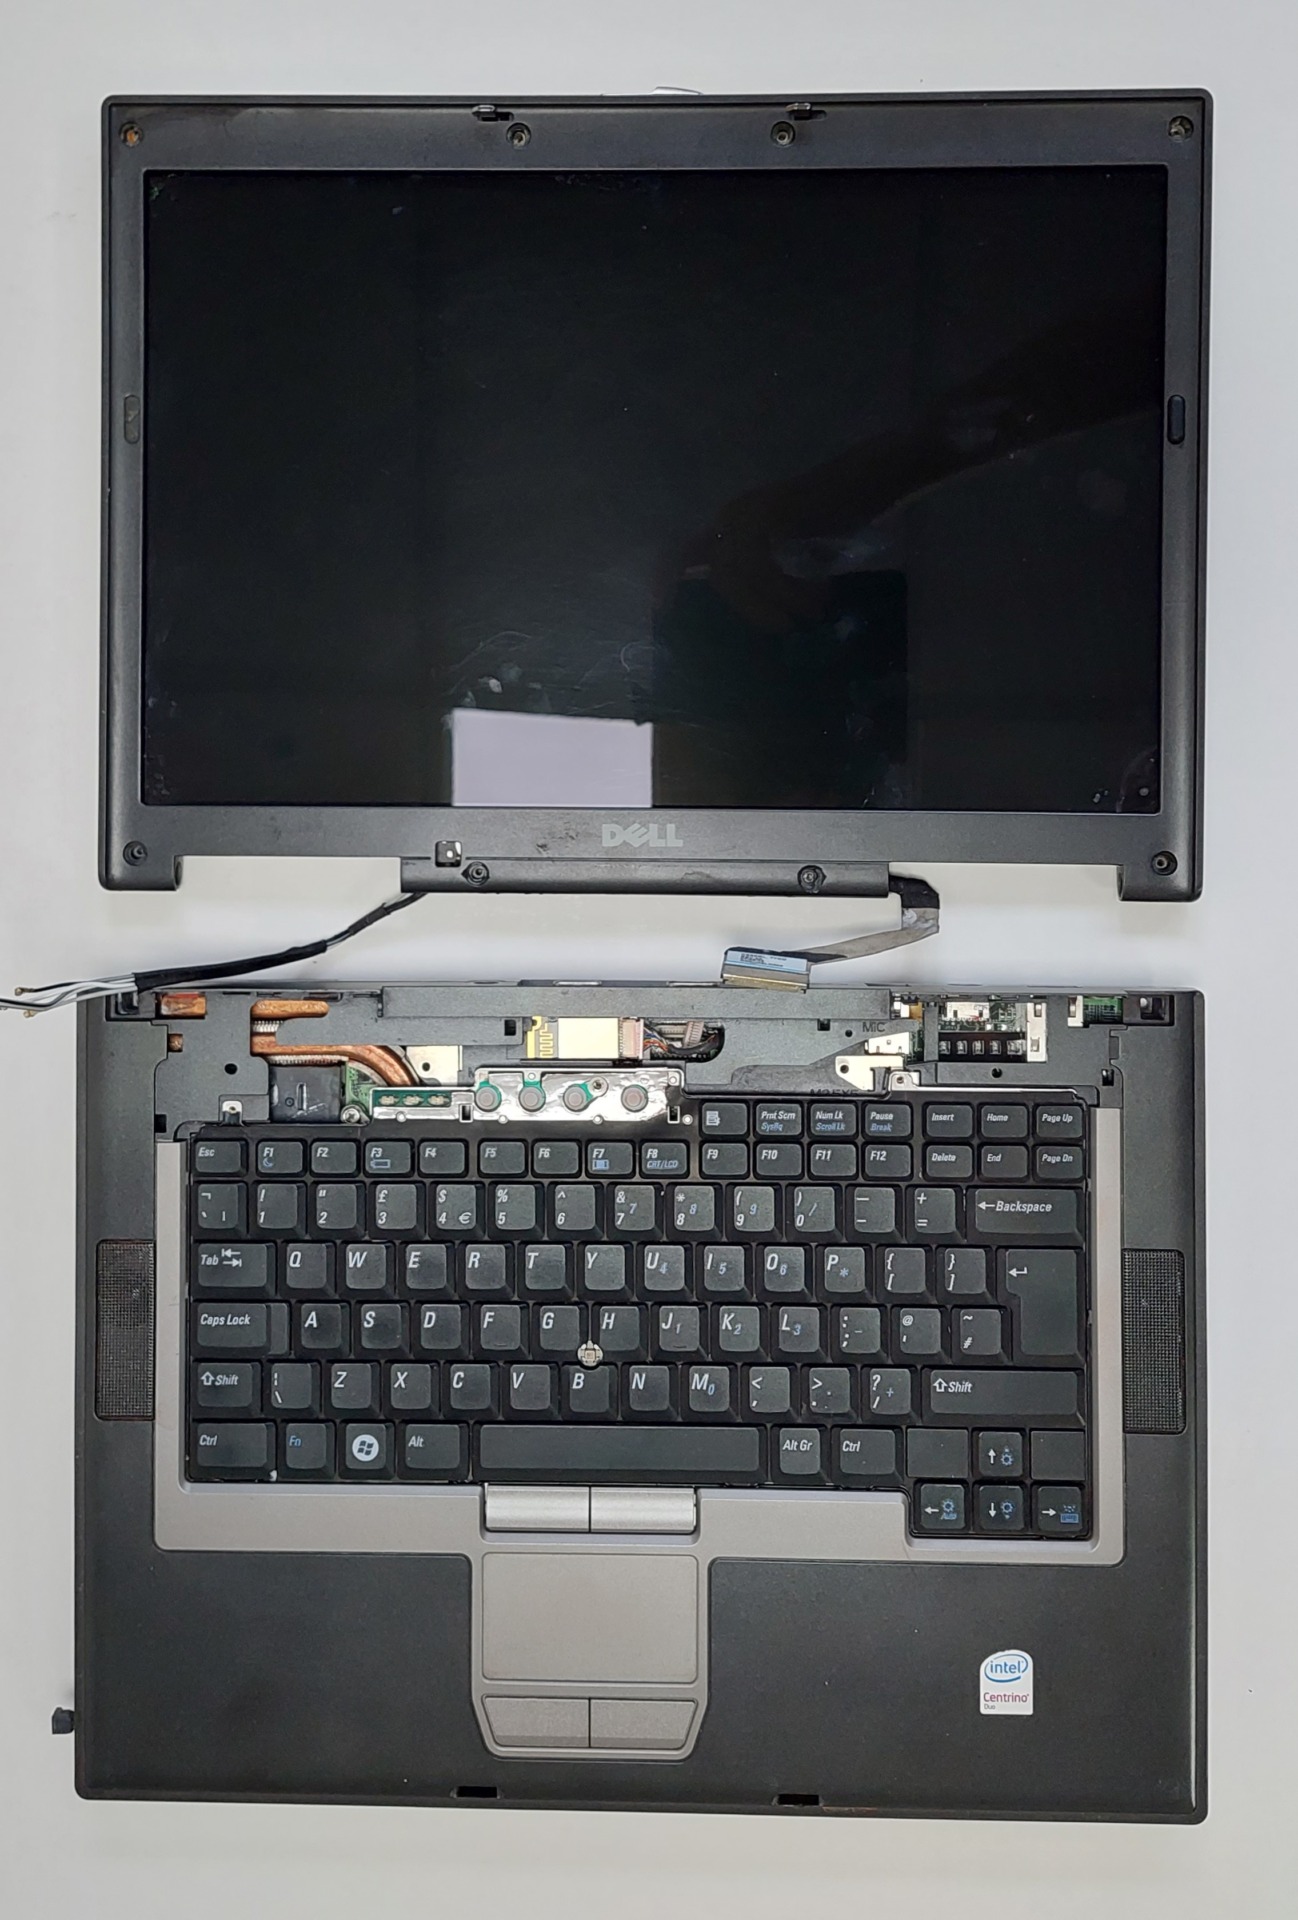 Laptop with screen and keyboard removed from each other